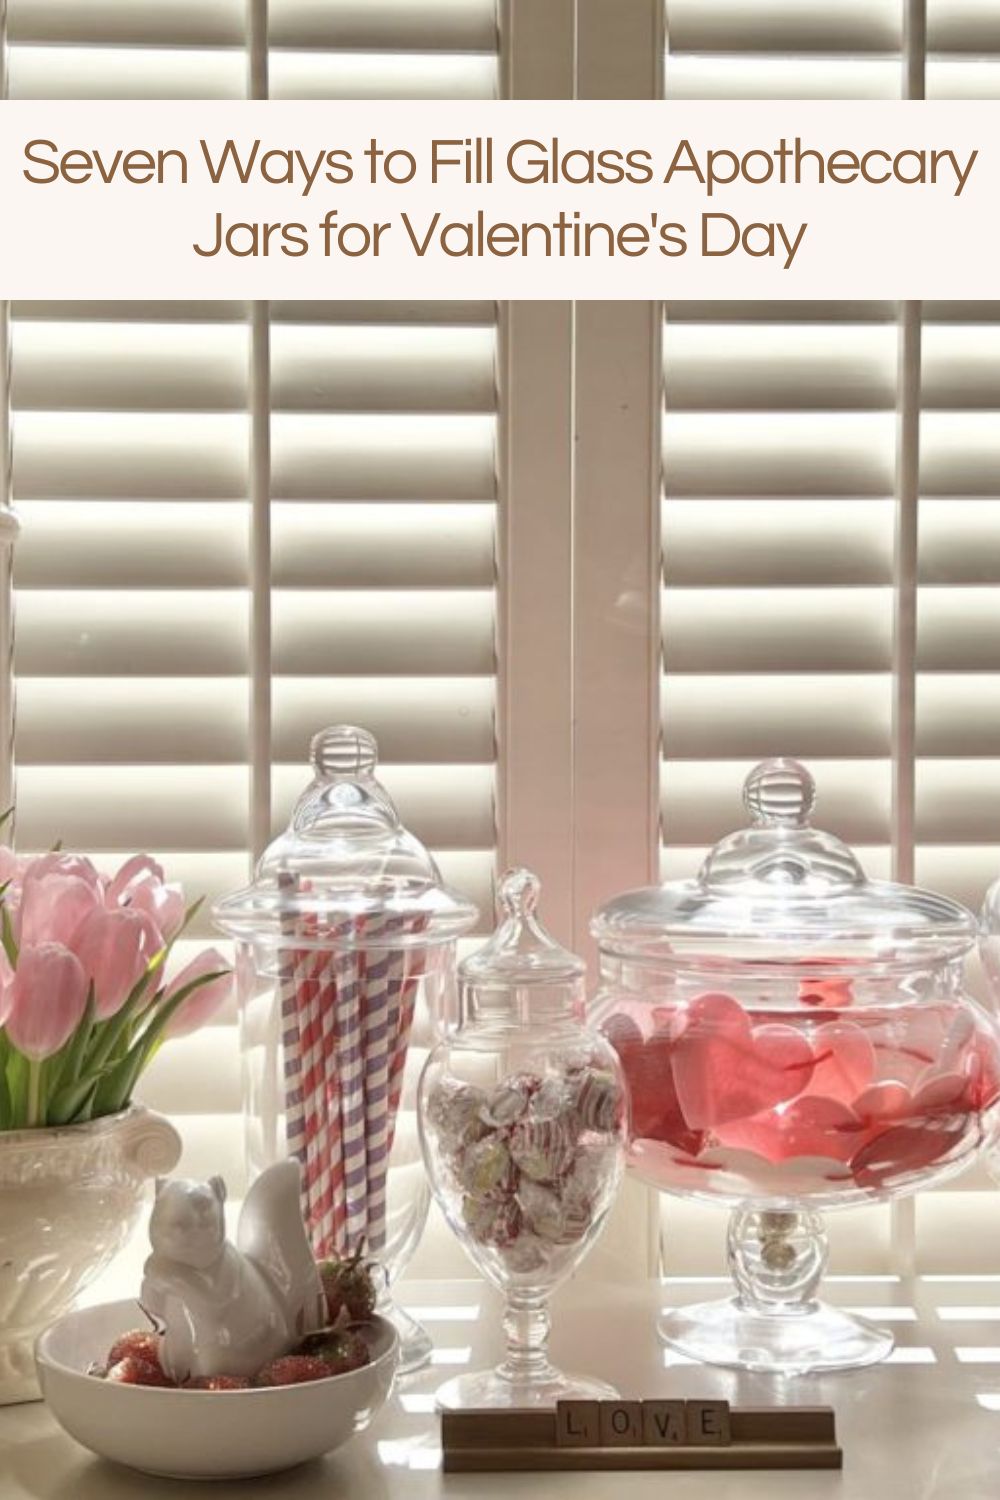 Glass apothecary jars are one of my favorite ways to display decor. Today I am sharing seven ways you can fill them to decorate for Valentine's Day.